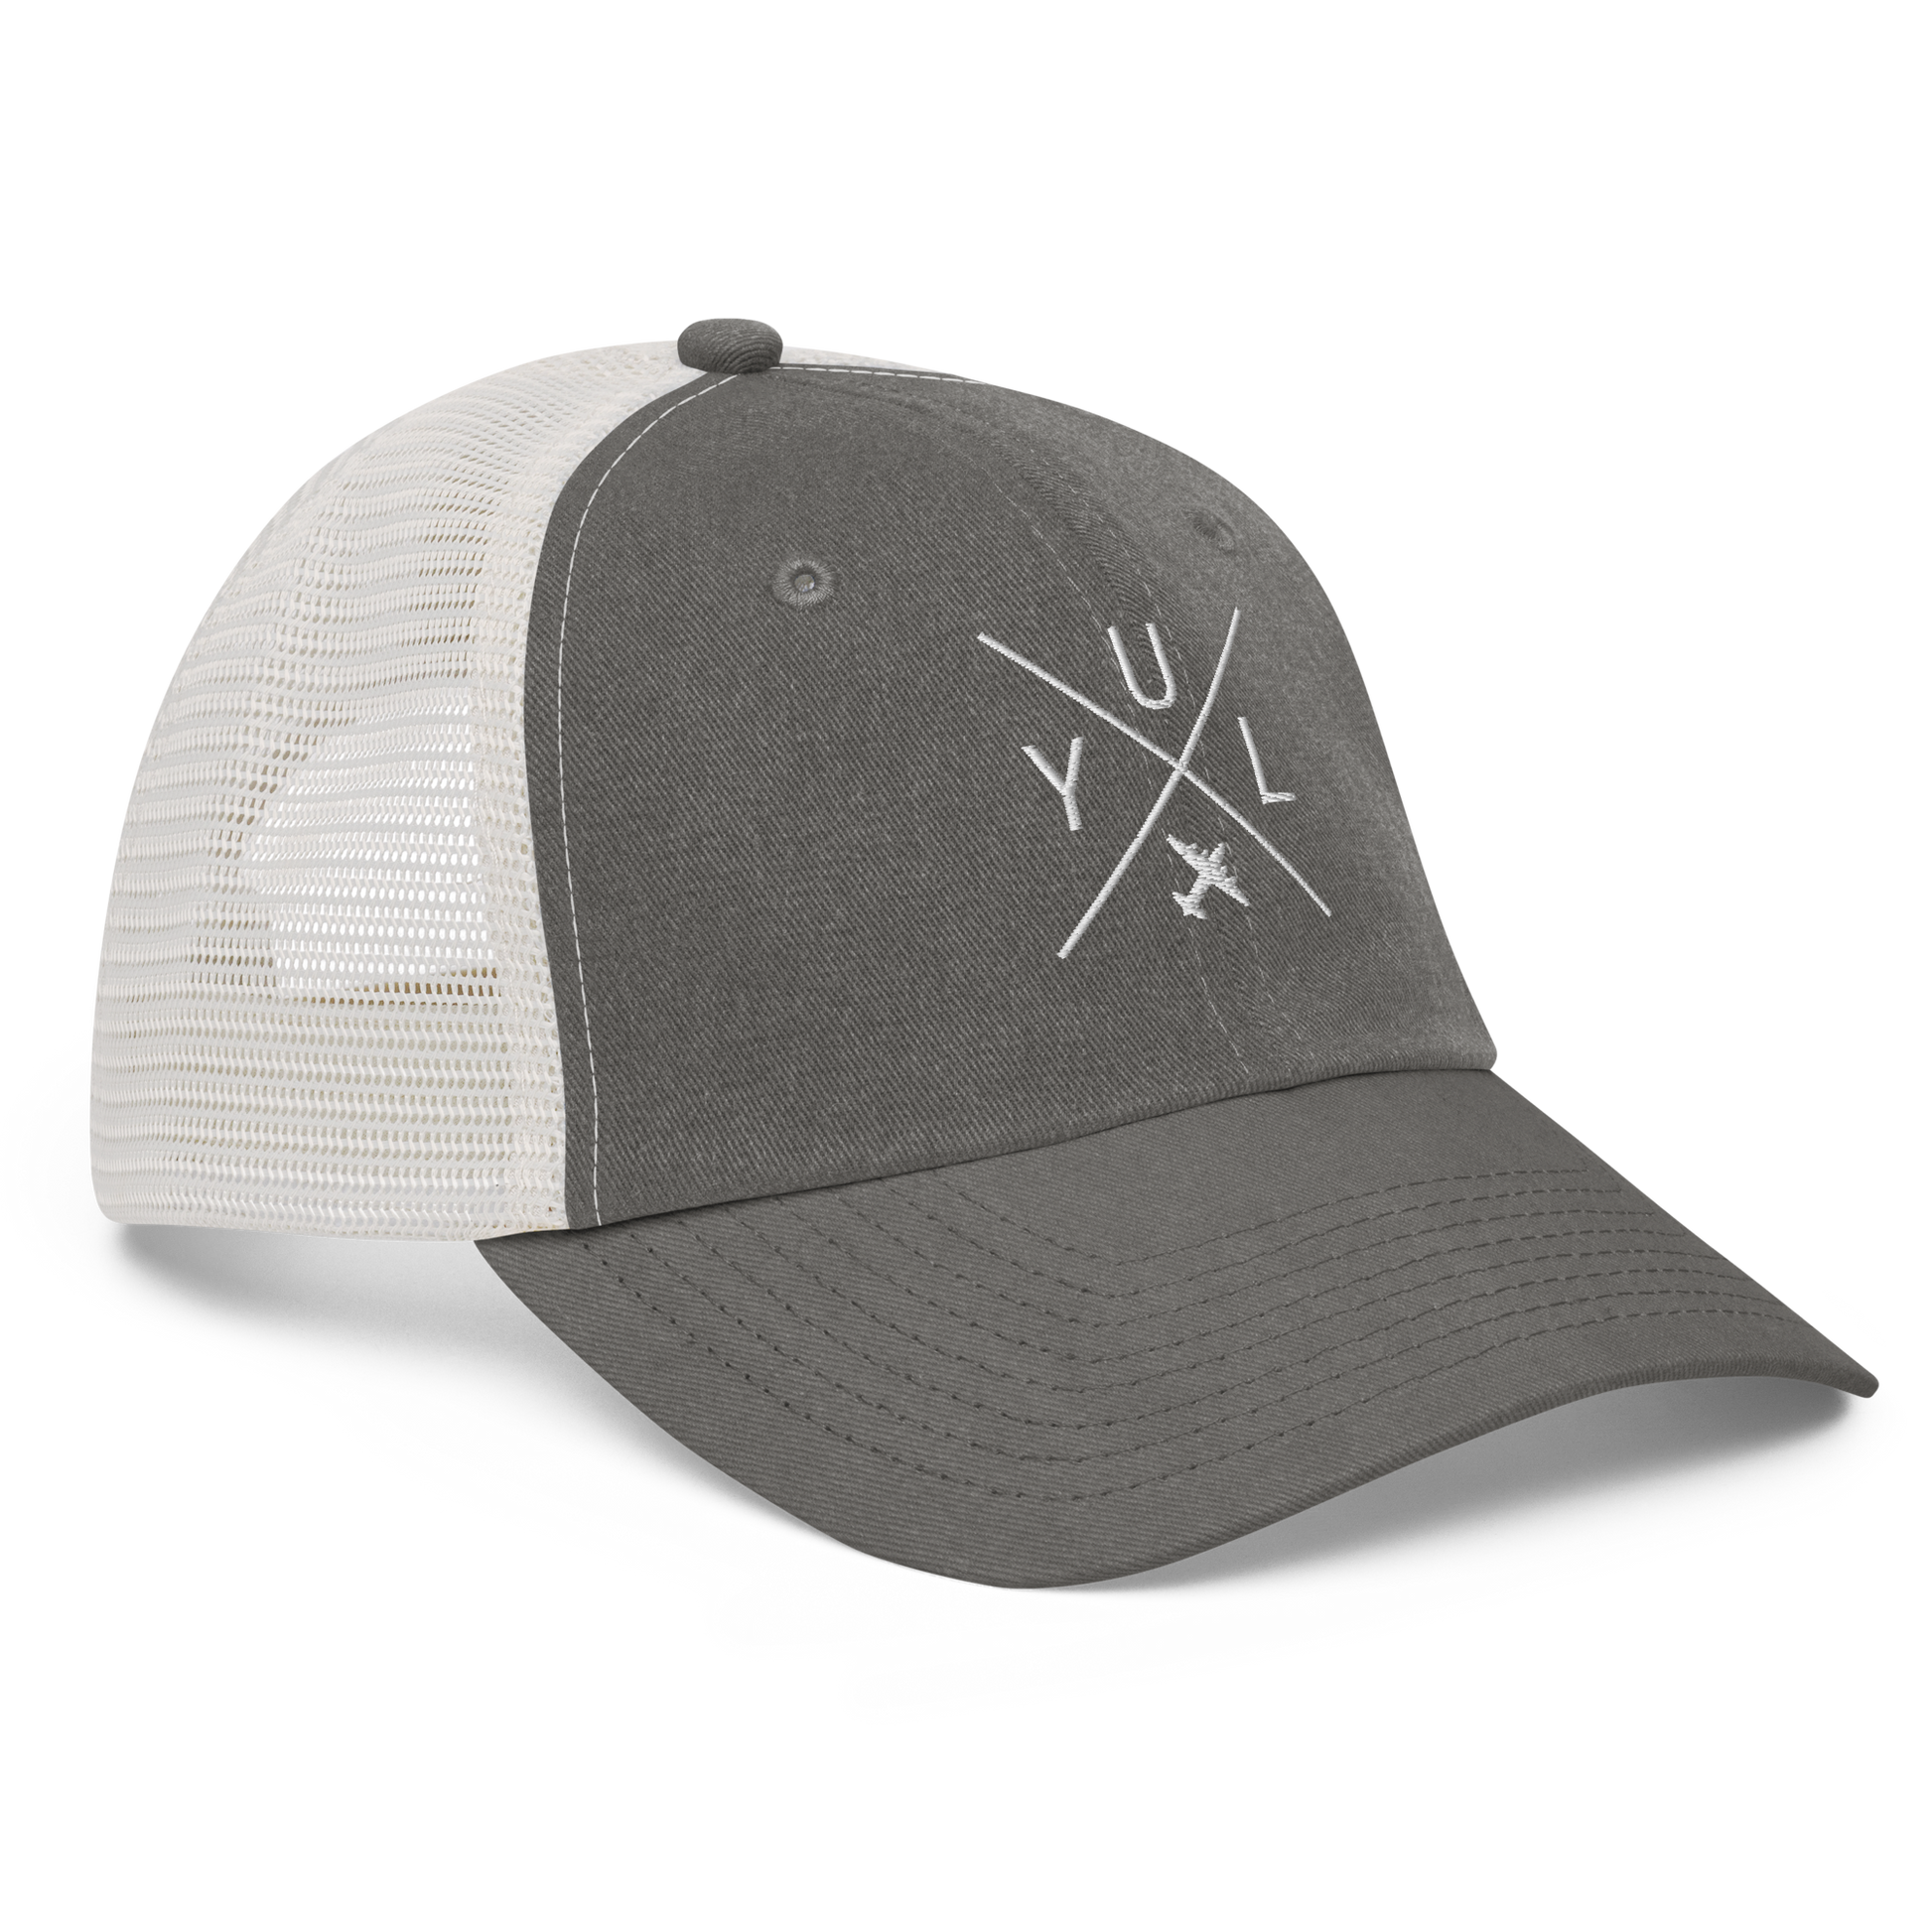 YHM Designs - YUL Montreal Pigment-Dyed Trucker Cap - Crossed-X Design with Airport Code and Vintage Propliner - White Embroidery - Image 10